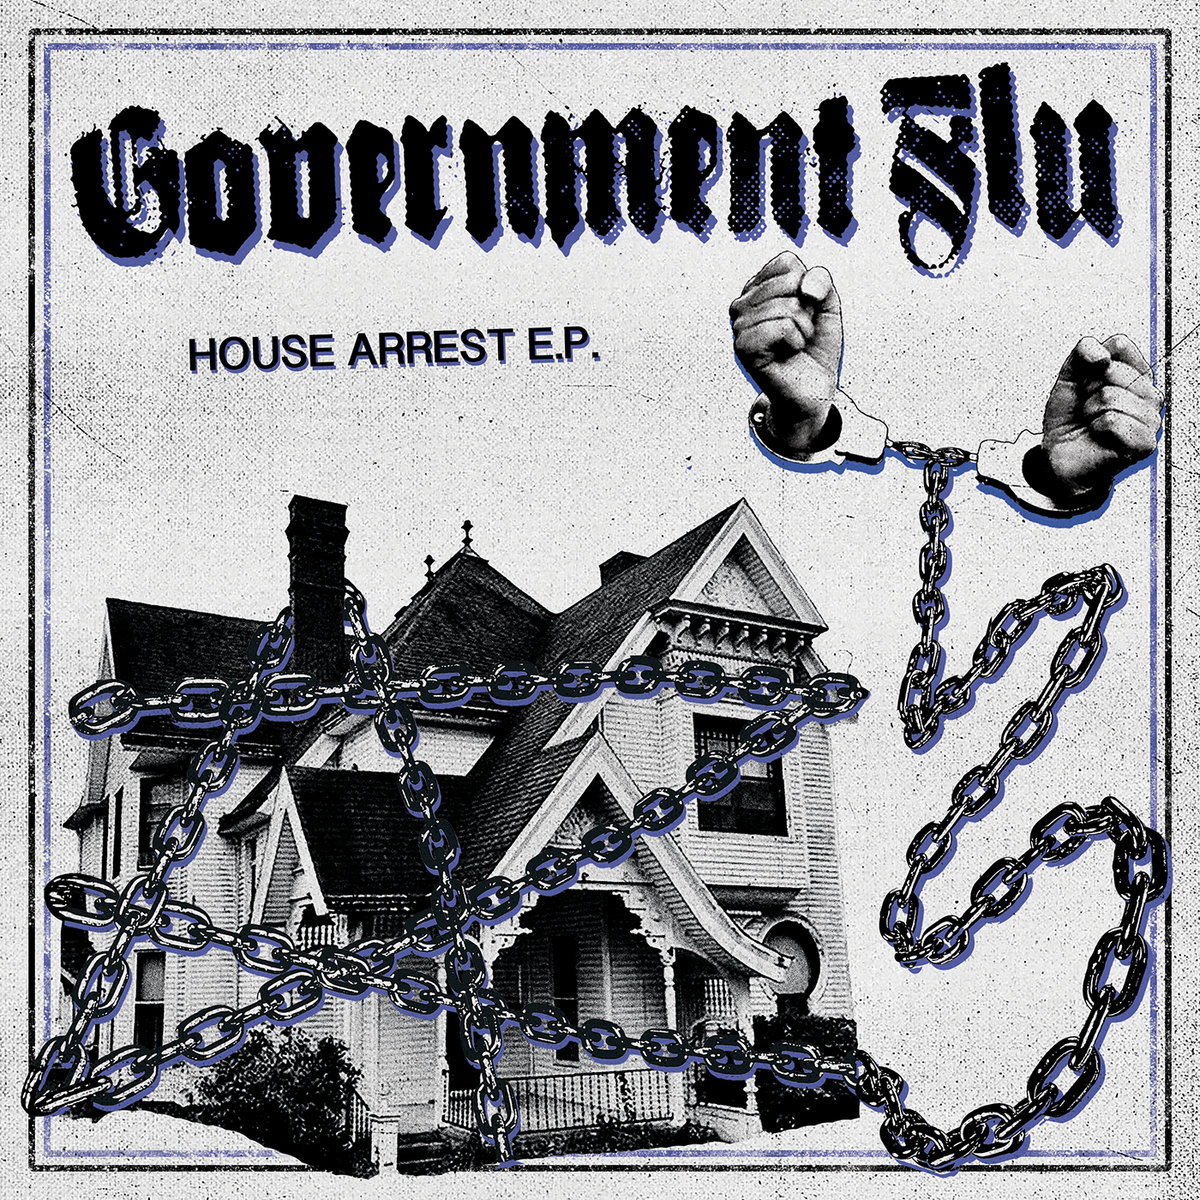 GOVERNMENT FLU “House arrest” EP